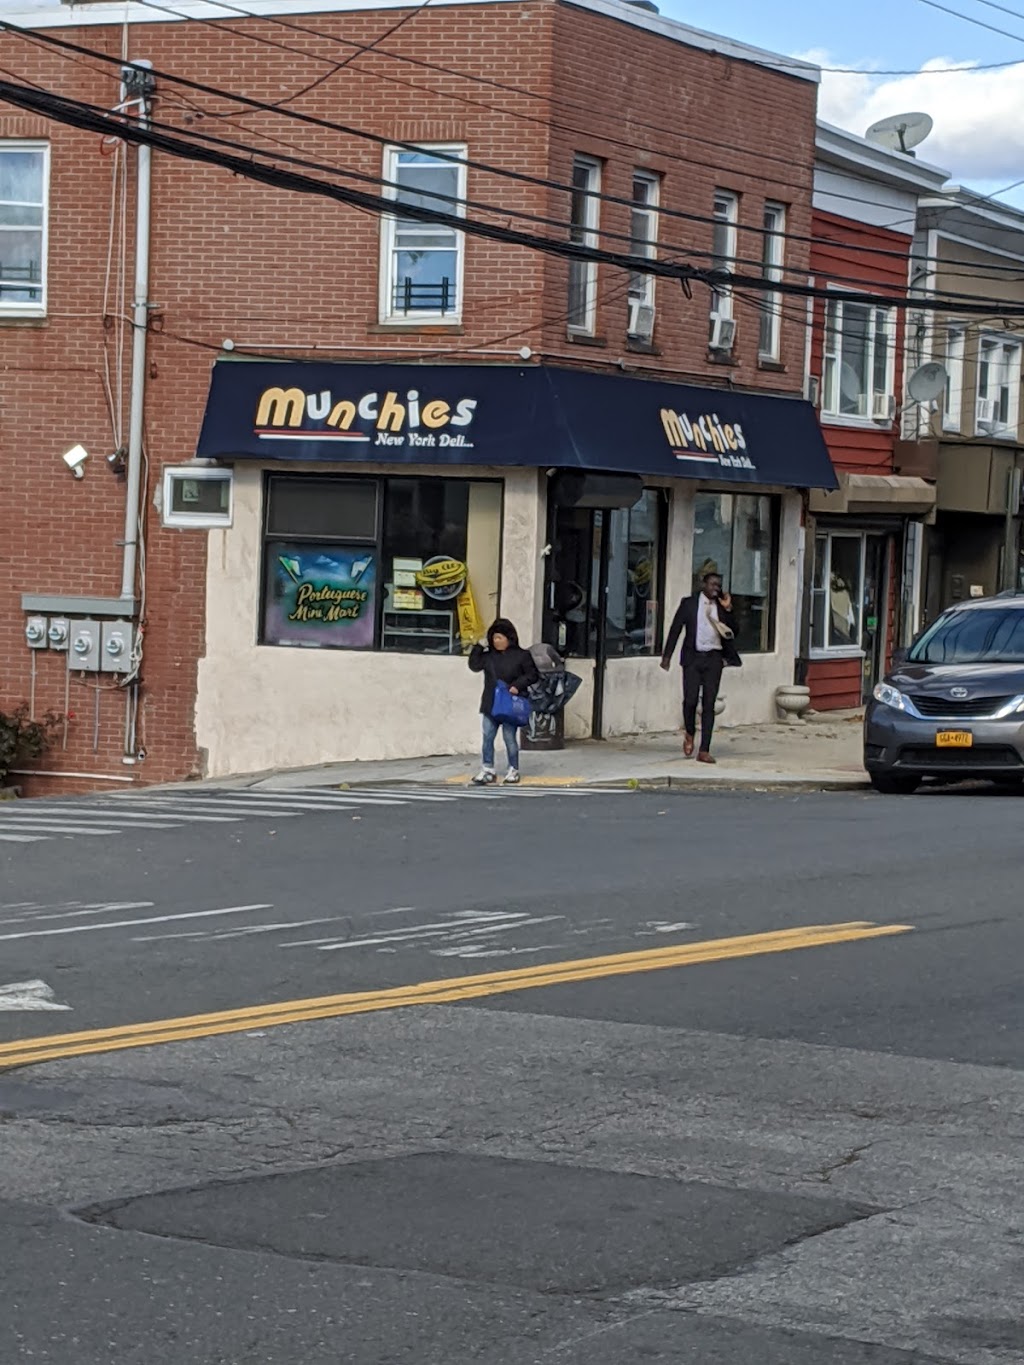 Big Als Munchies | cafe | 291 Saw Mill River Rd, Yonkers, NY 10701, USA | 9142268251 OR +1 914-226-8251